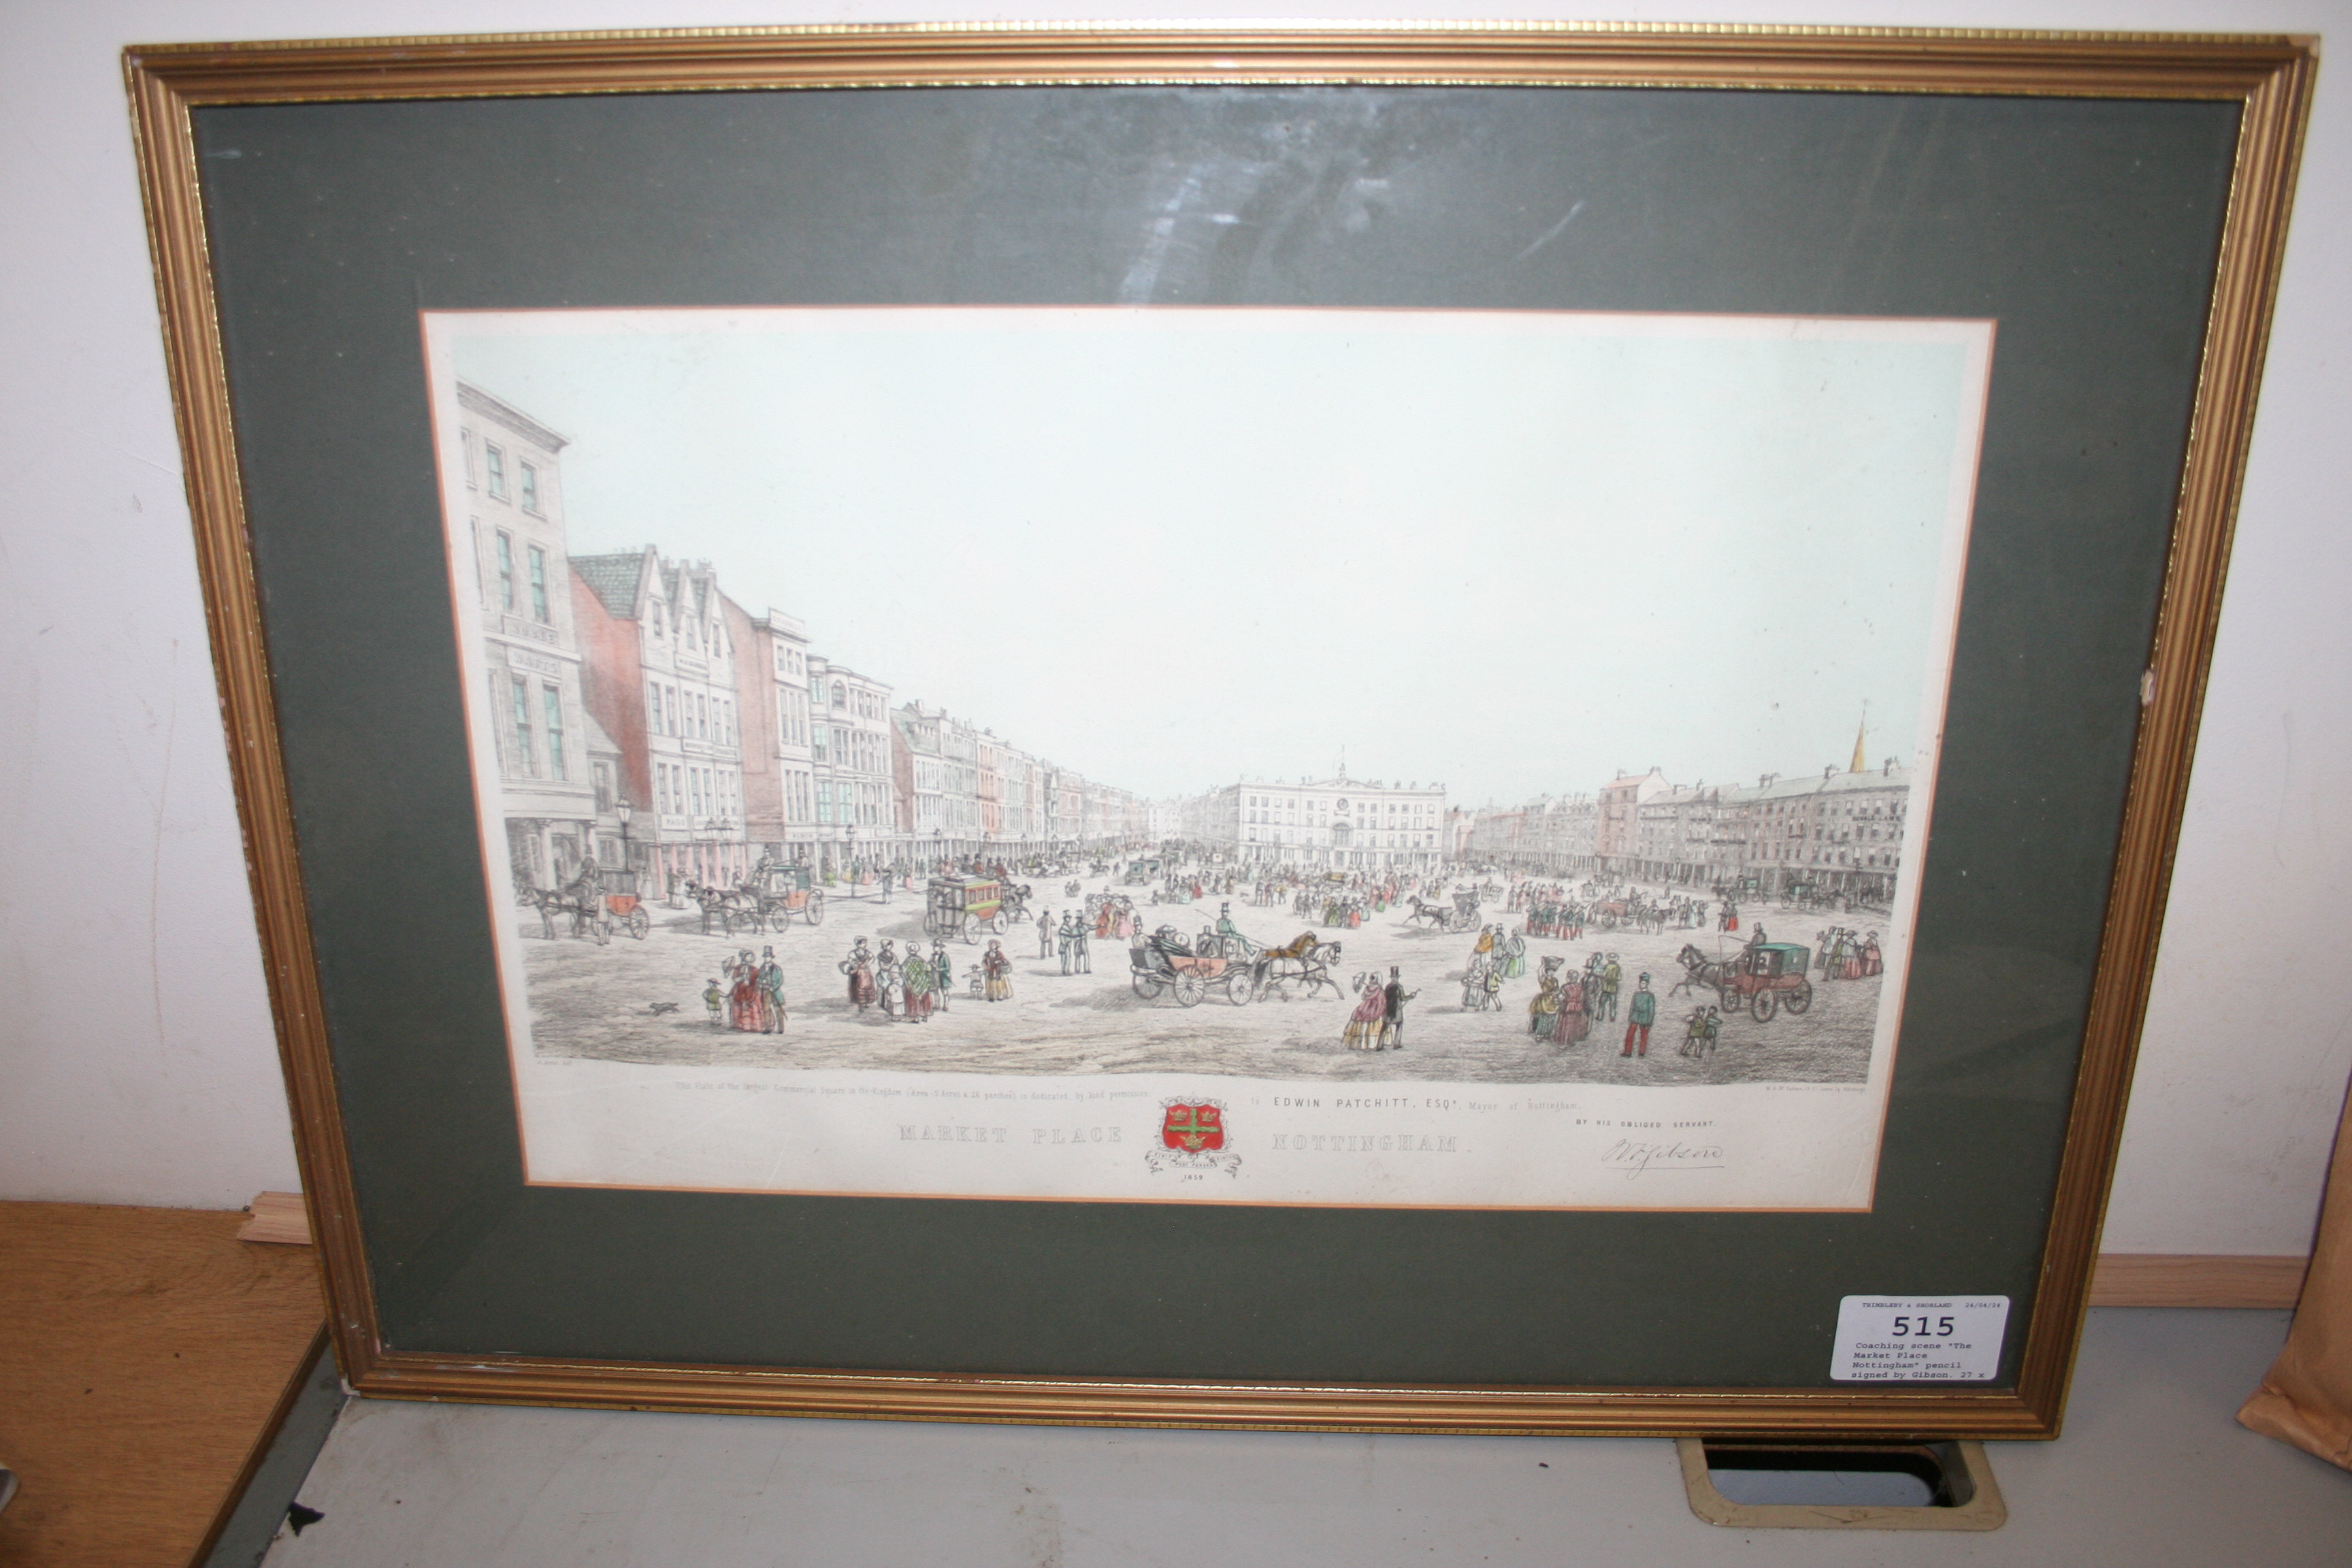 Coaching scene "The Market Place Nottingham" pencil signed by Gibson. 27" x 19"